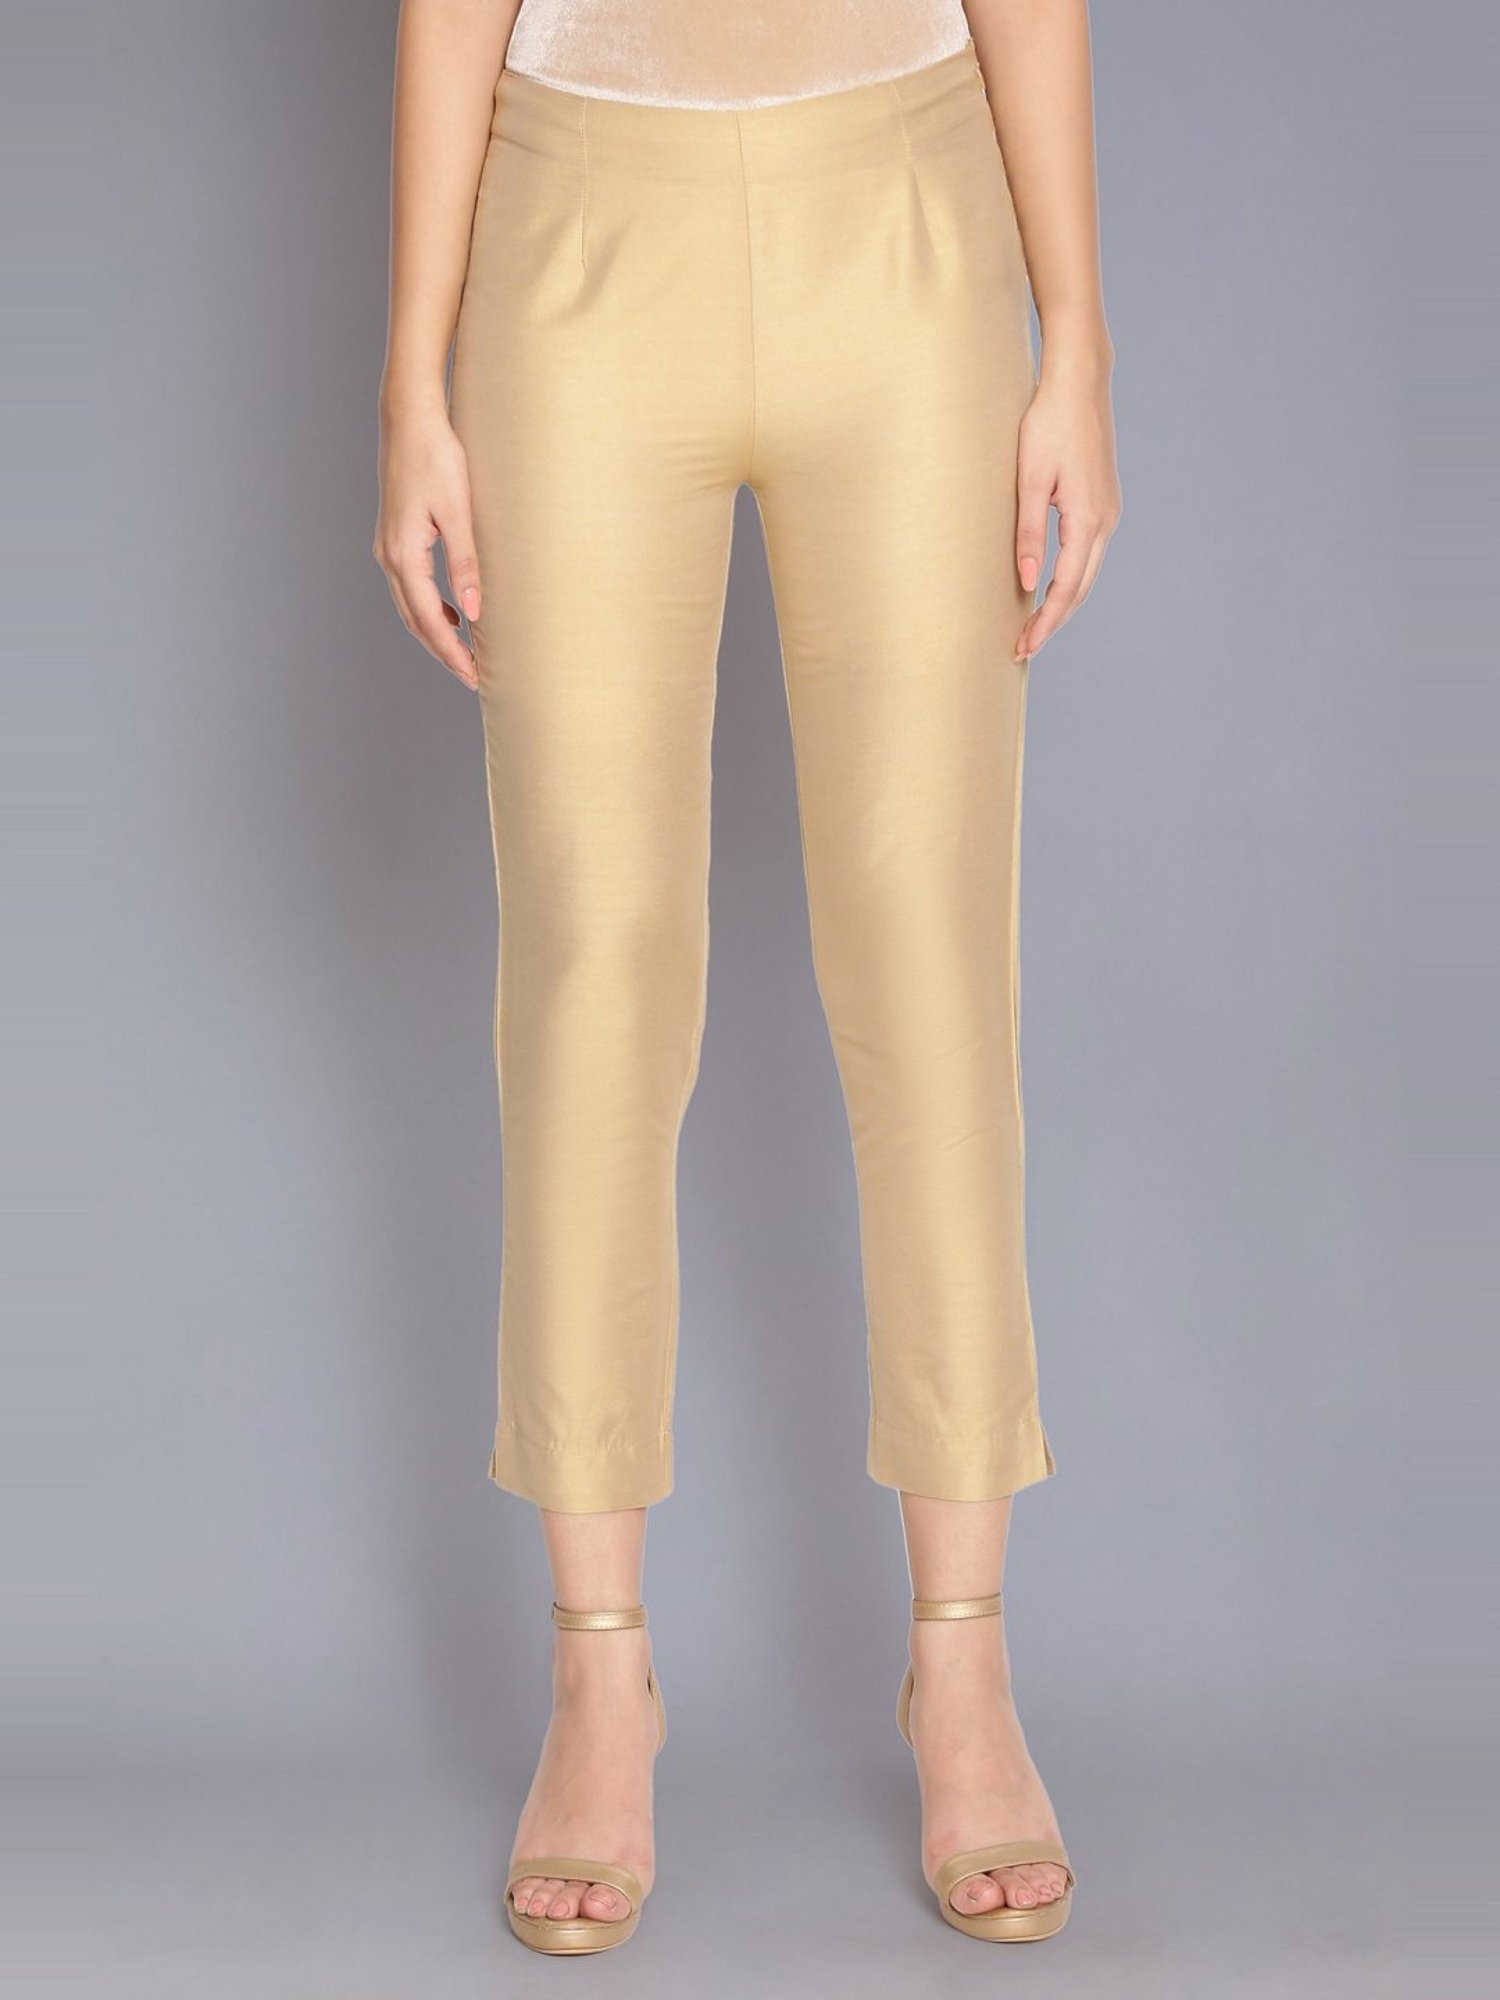 Women Solid Golden Yellow Mid Rise Cotton Pants